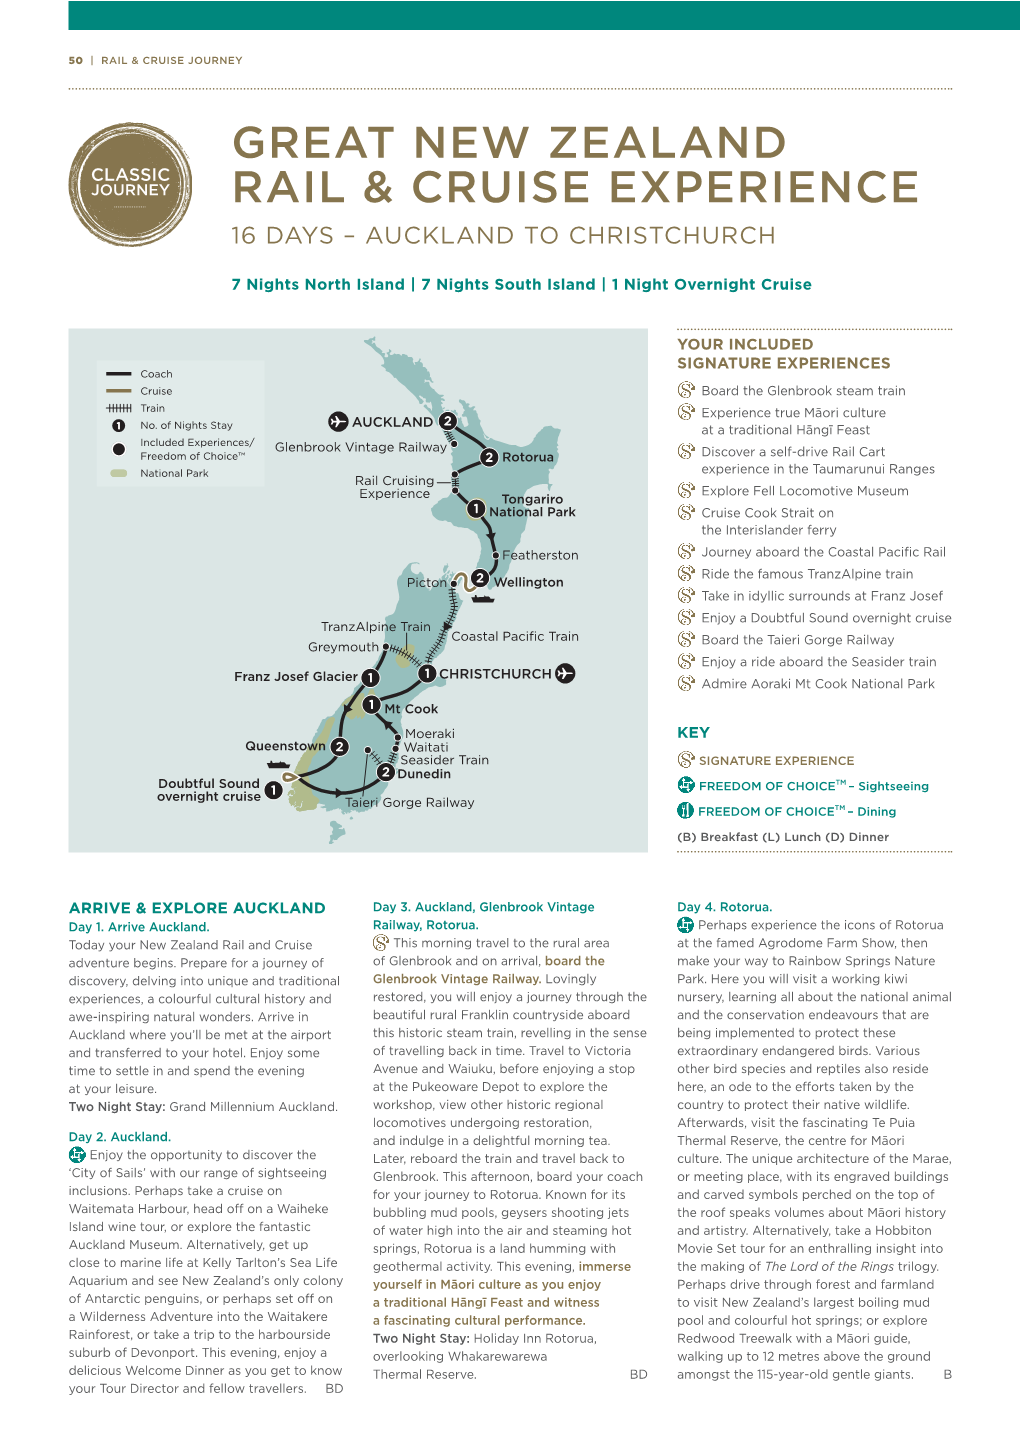 Great New Zealand Rail & Cruise Experience